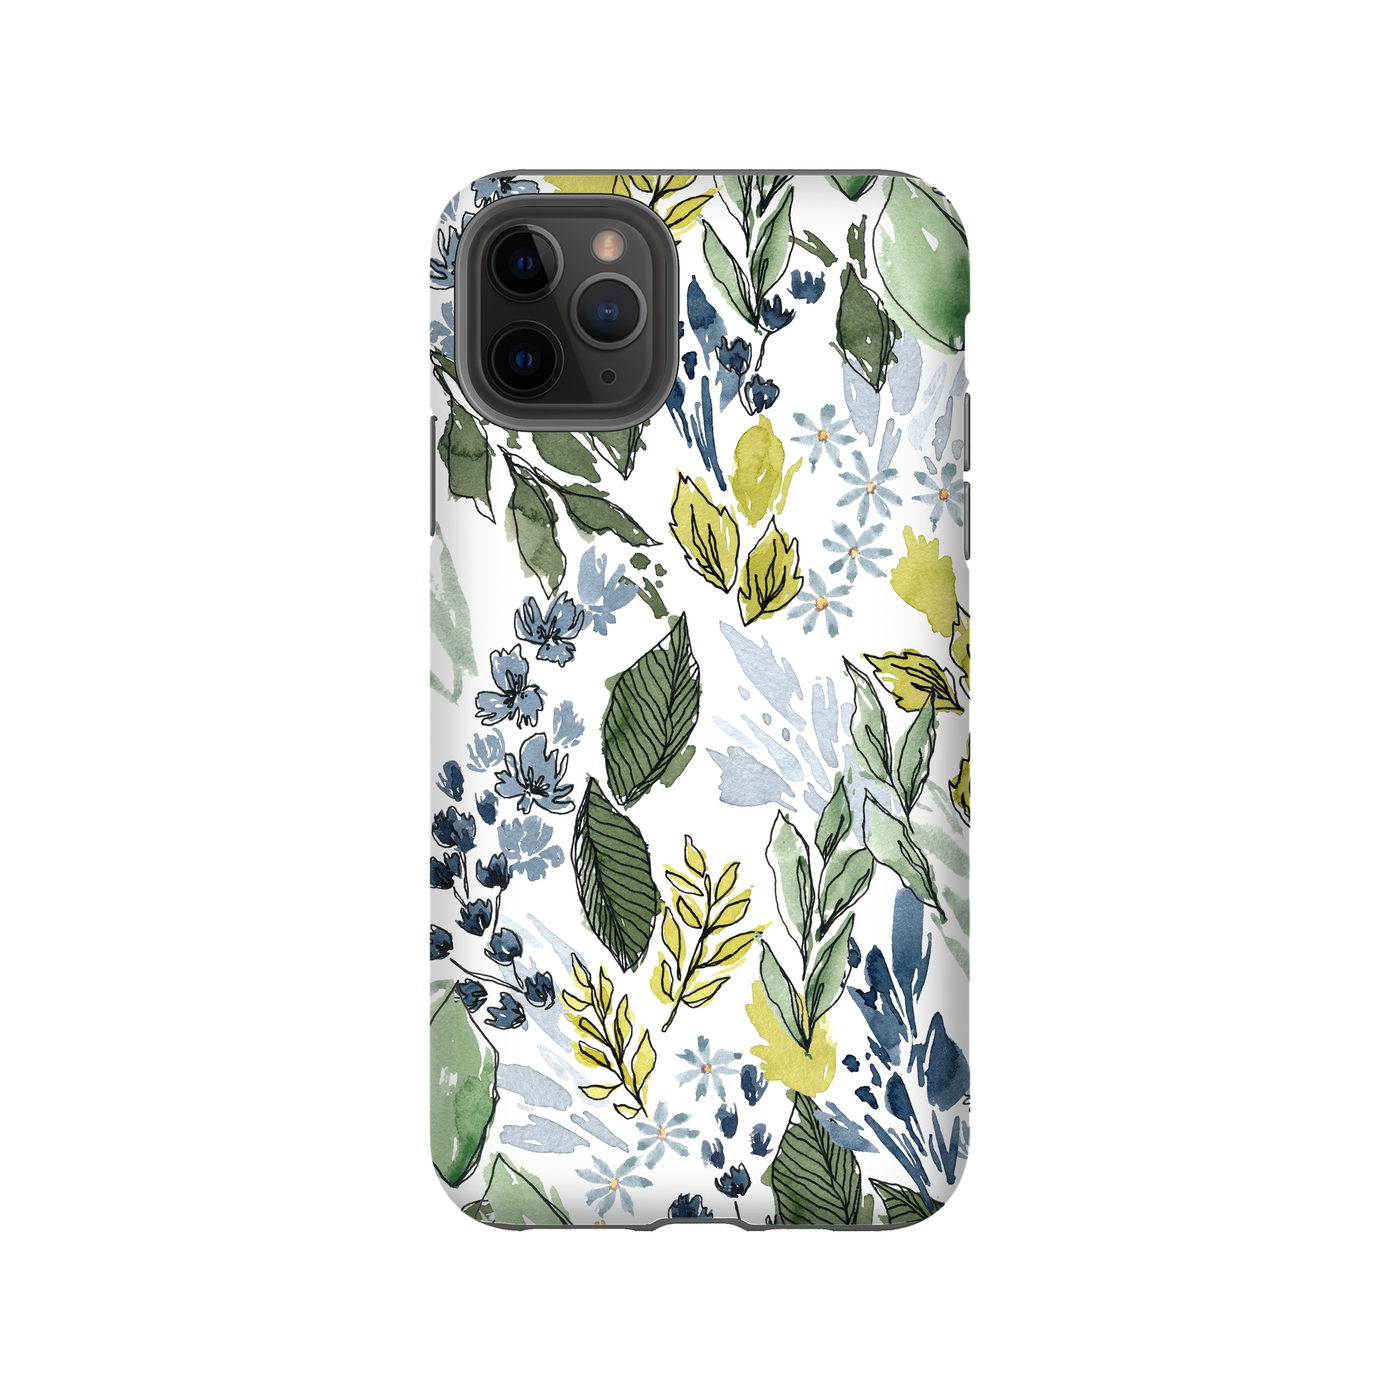 iPhone case in leafy green